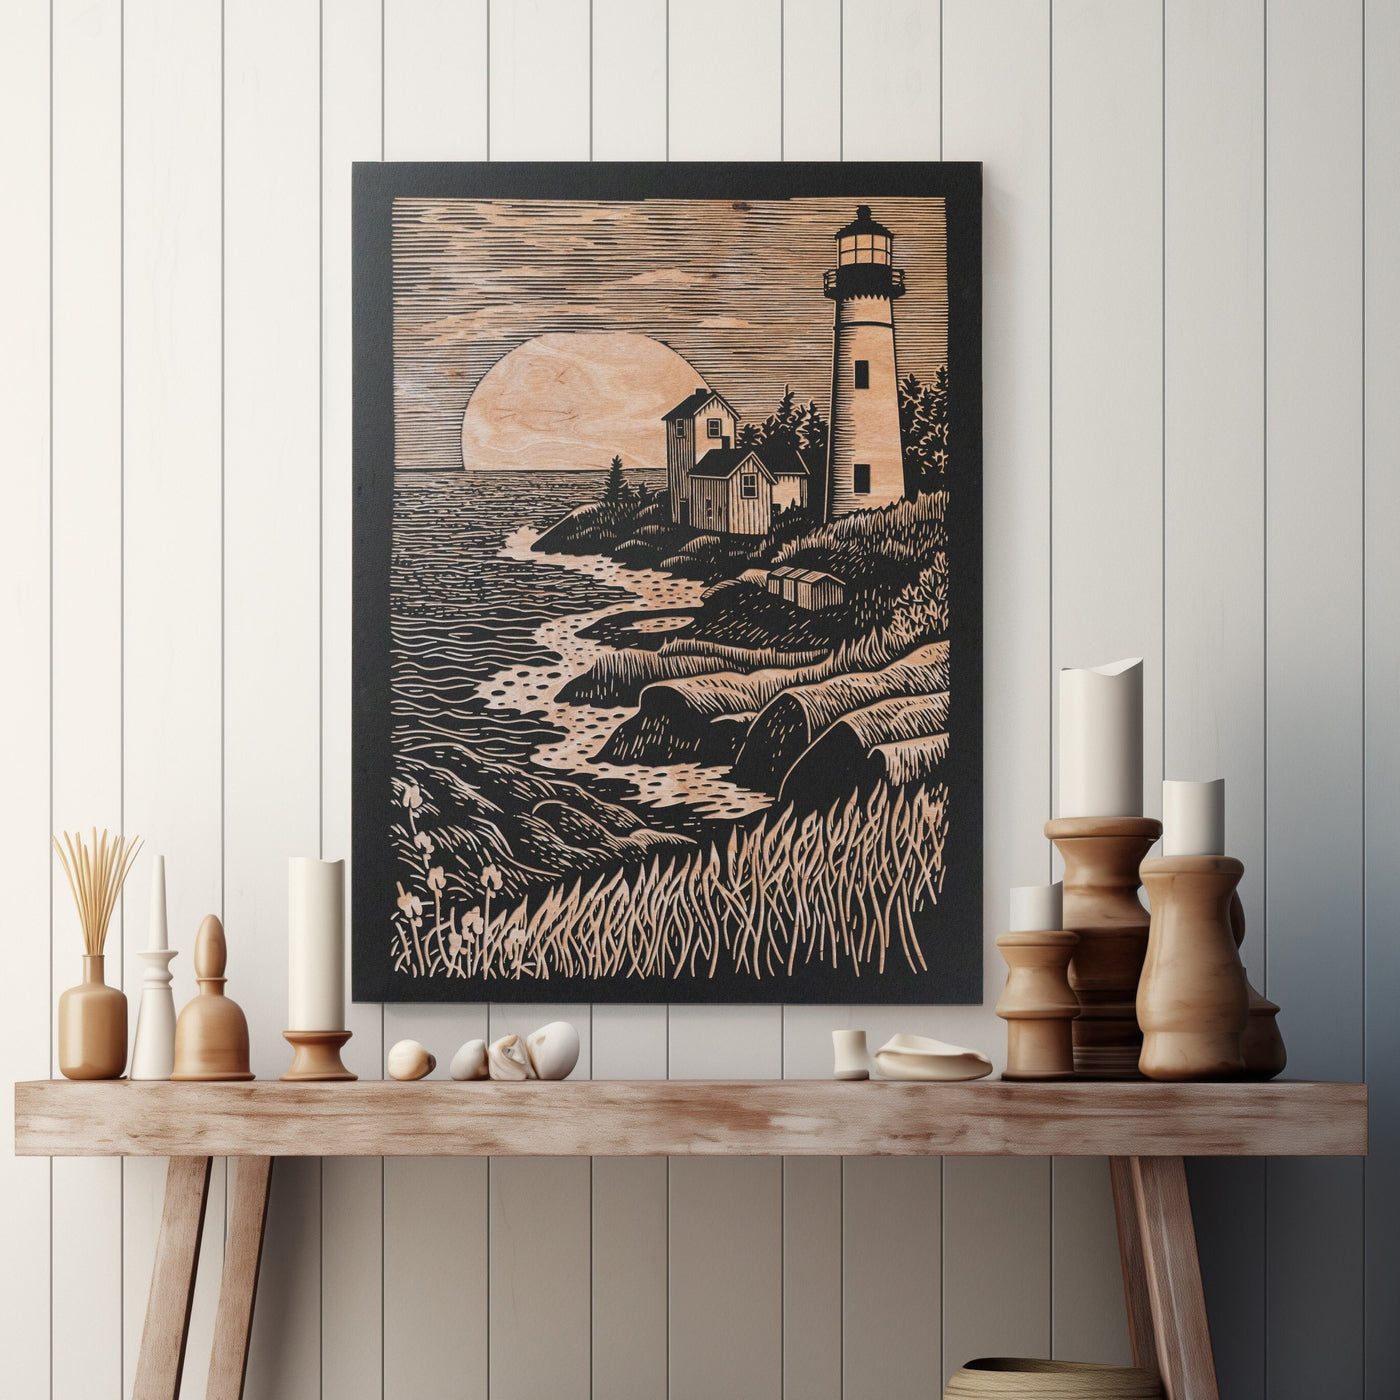 Lighthouse Engraved Wood Panel | Block Print Inspired Nautical Wall Art, Boating Illustration Cottage Home Decor, Beach House Print Gift